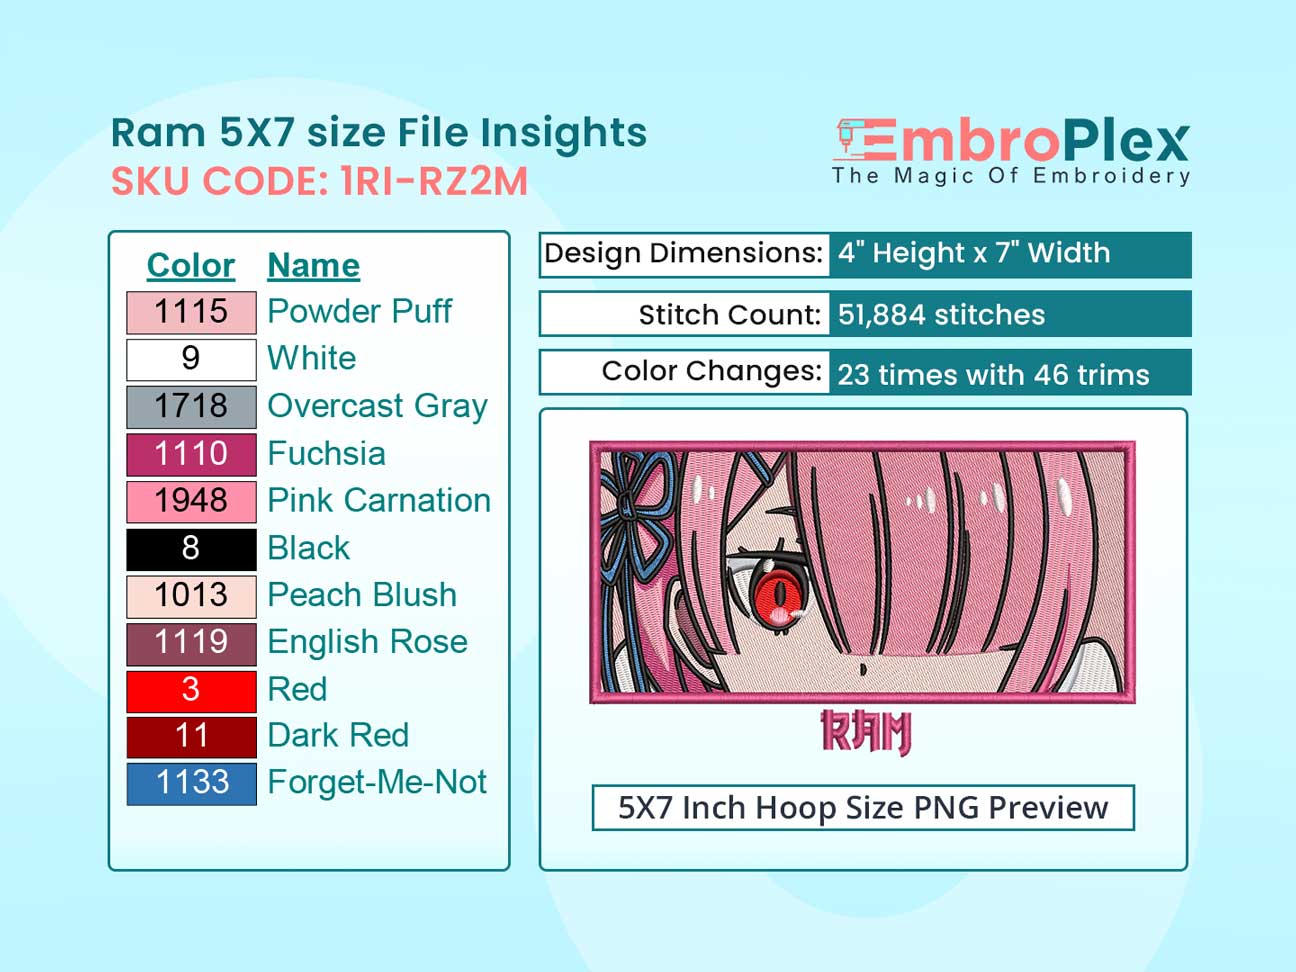 Anime-Inspired Ram Embroidery Design File - 5x7 Inch hoop Size Variation overview image